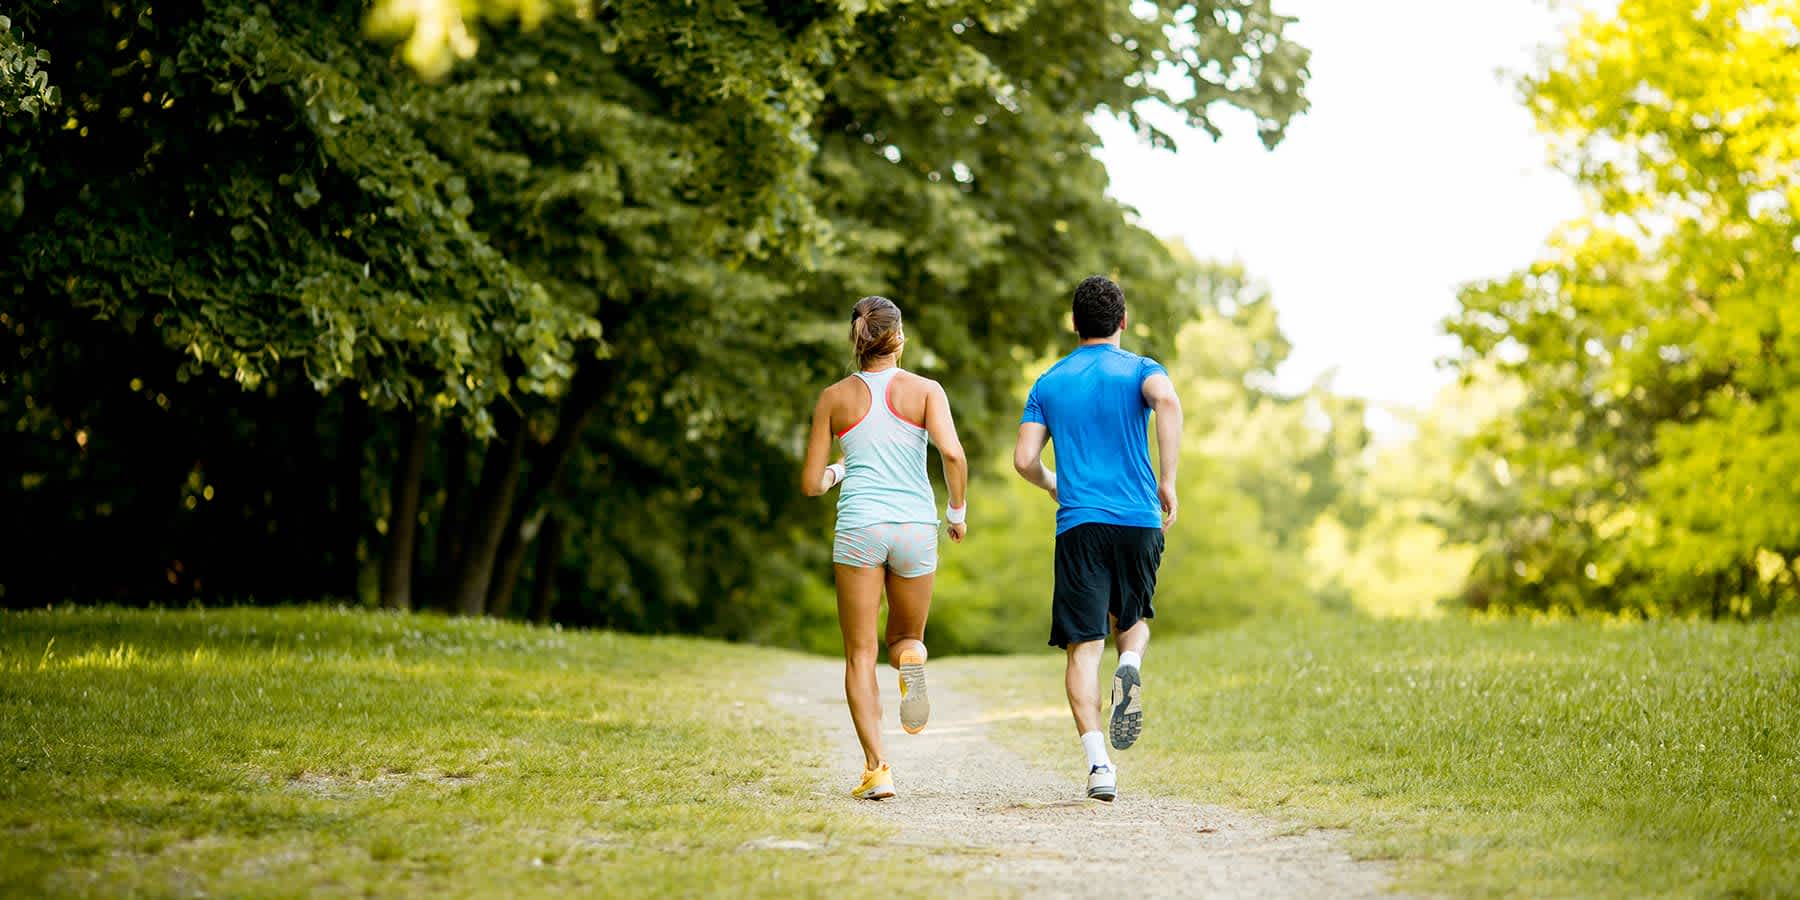 Two people jogging side by side to lose weight faster through physical activity